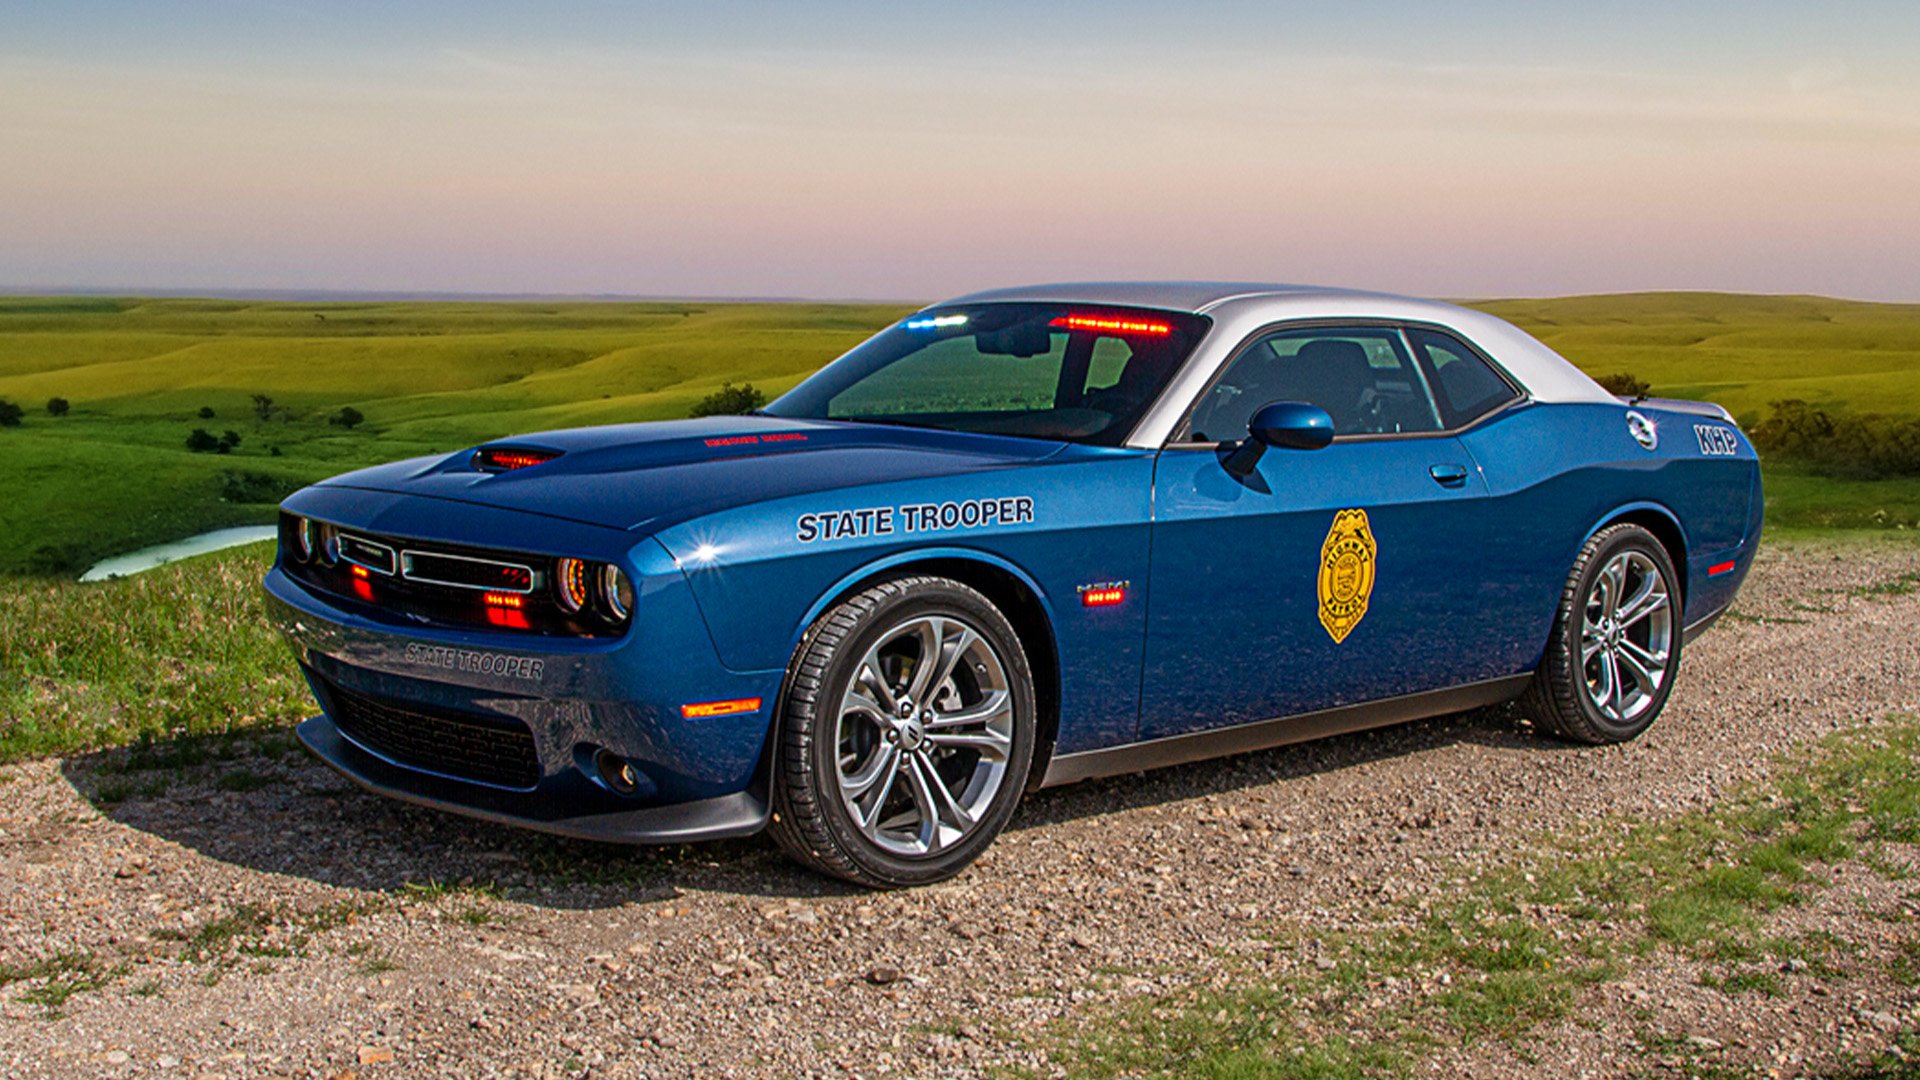 The Kansas Highway Patrol is vying against 43 other state police agencies in the 9th annual America’s Best Looking Cruiser Calendar Contest. Kansas Highway Patrol photo.